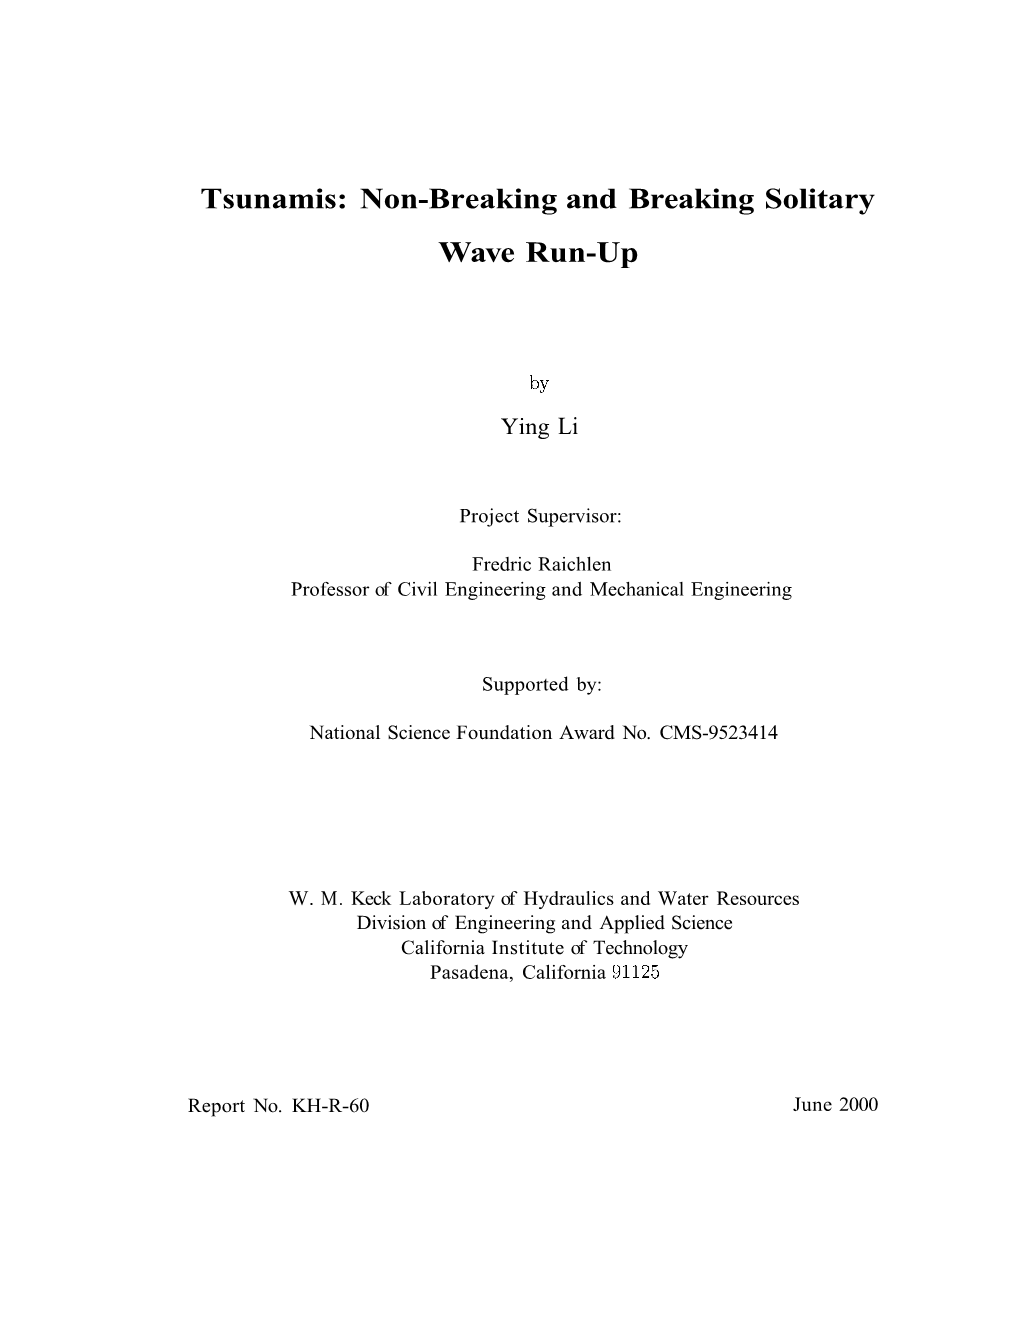 Tsunamis: Non-Breaking and Breaking Solitary Wave Run-Up